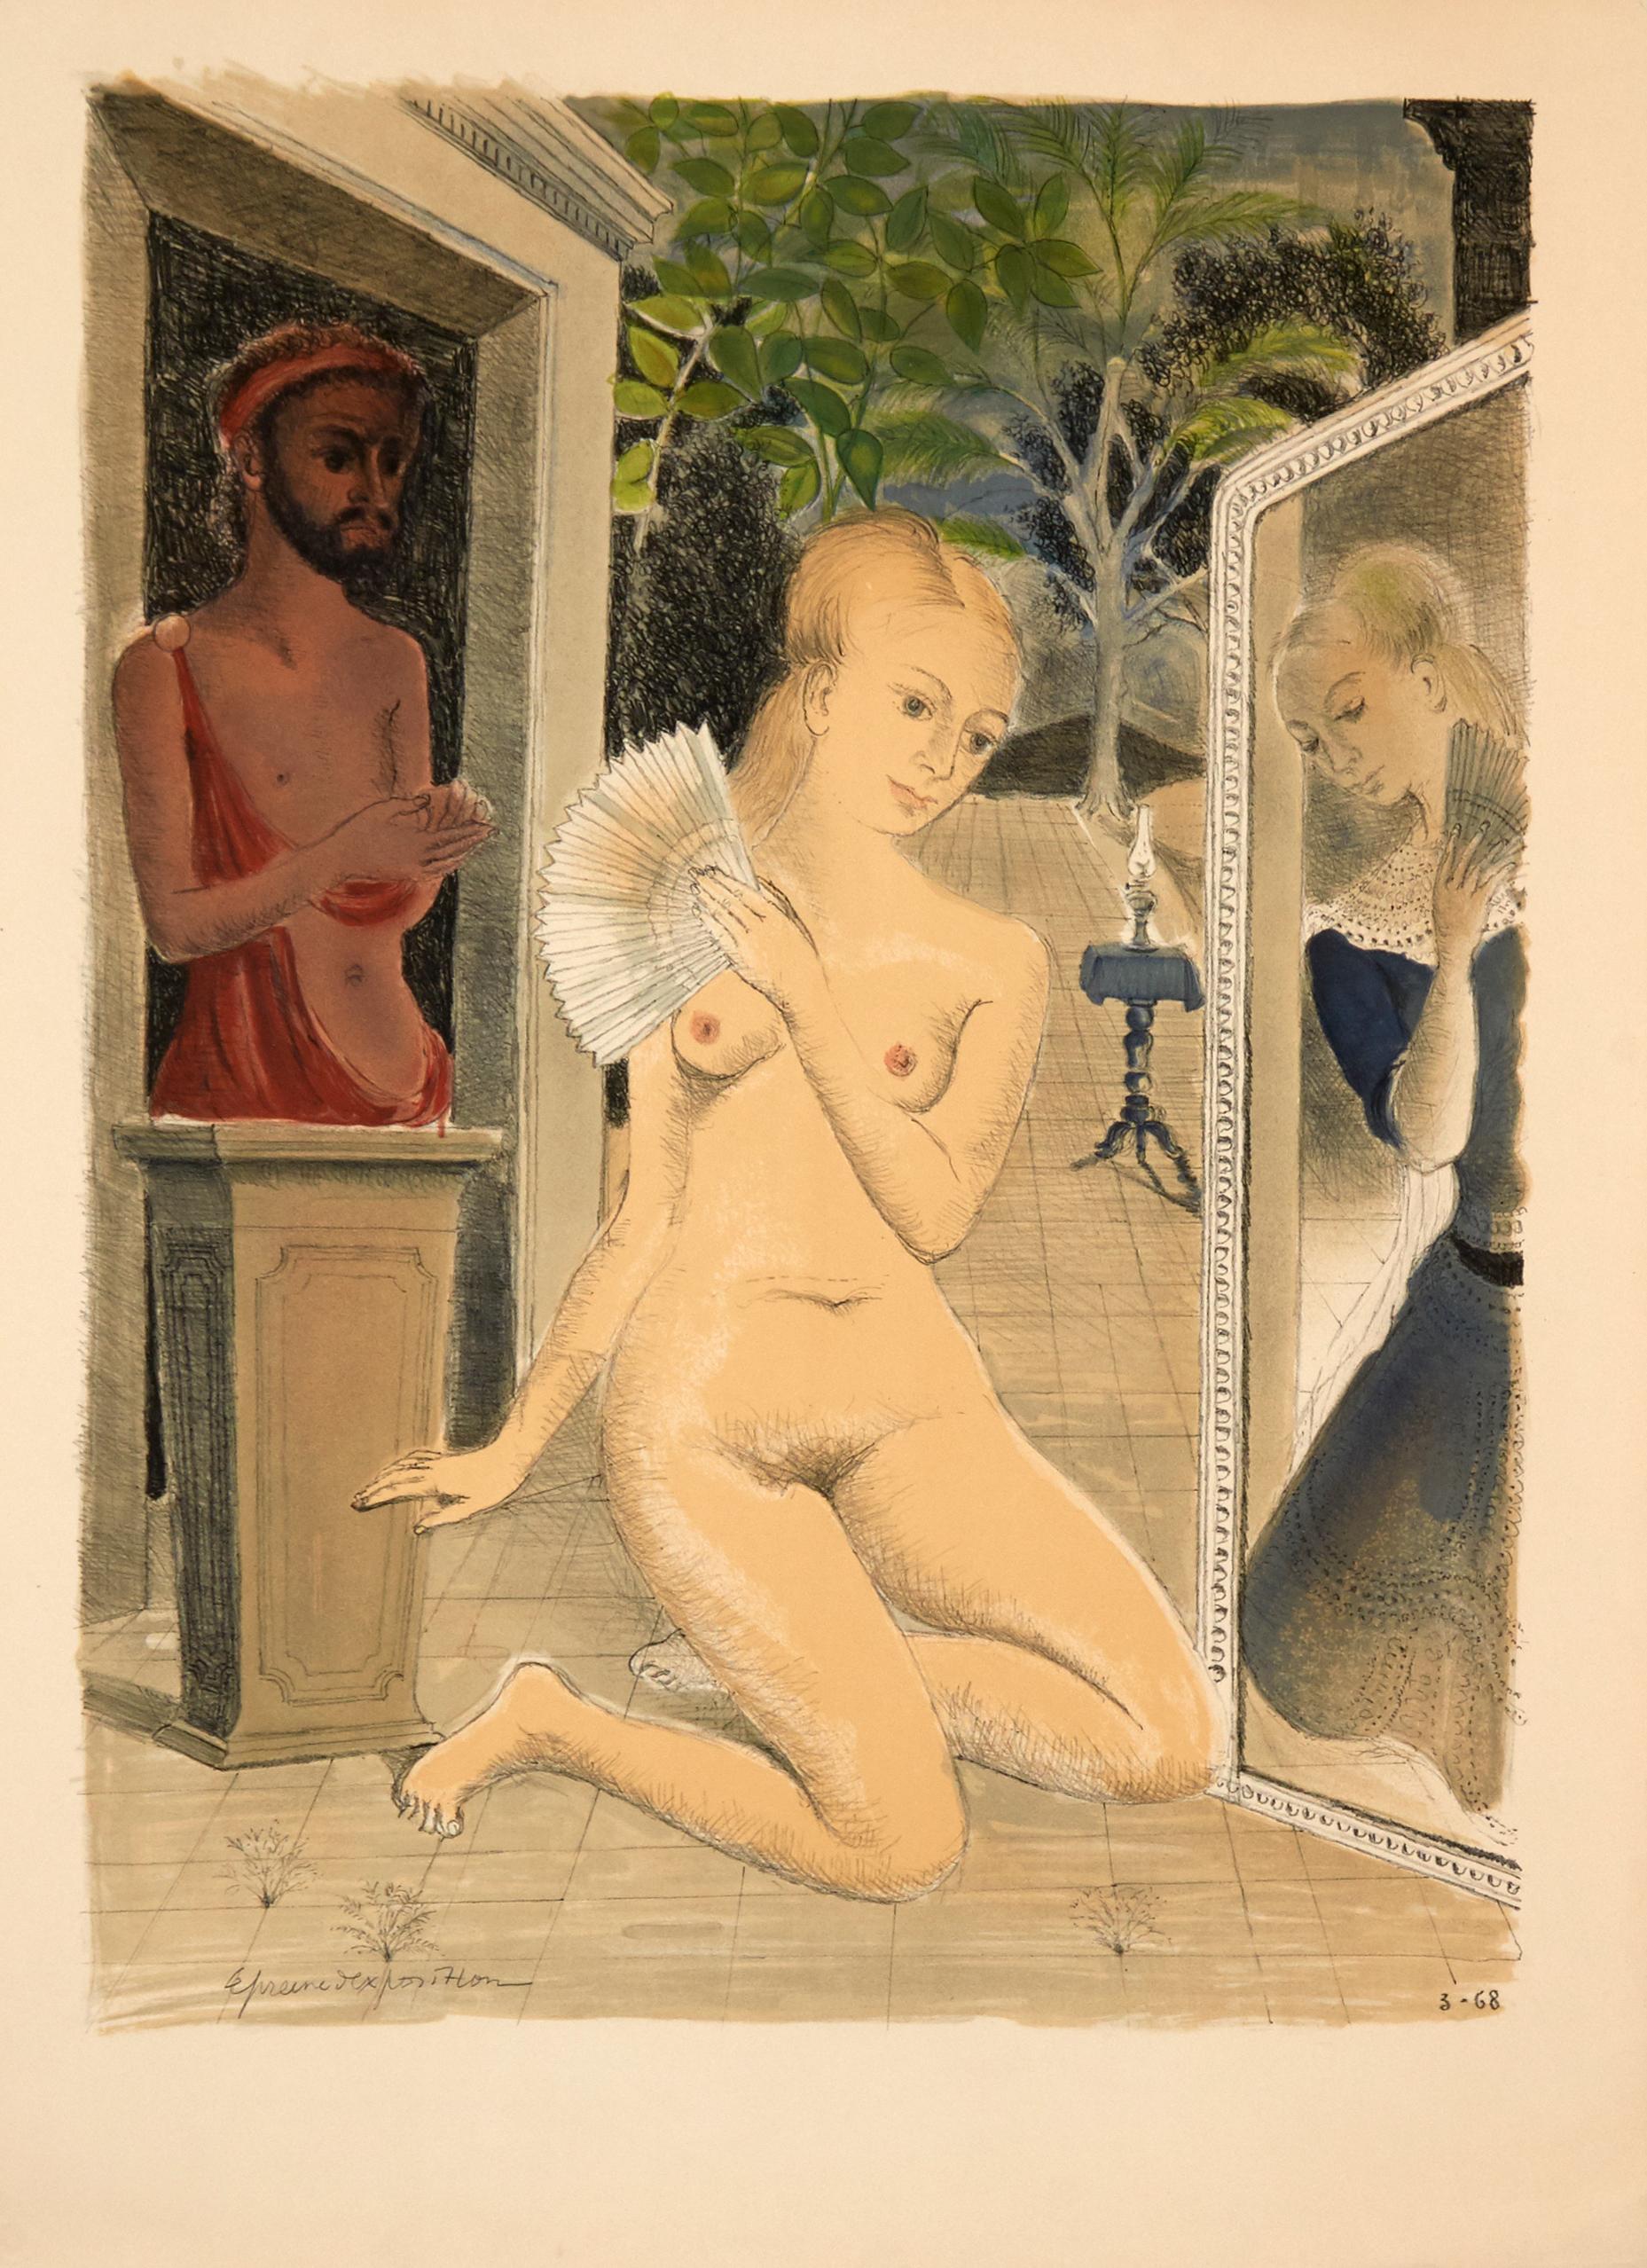 The Fan by Paul Delvaux (1968) - lithograph